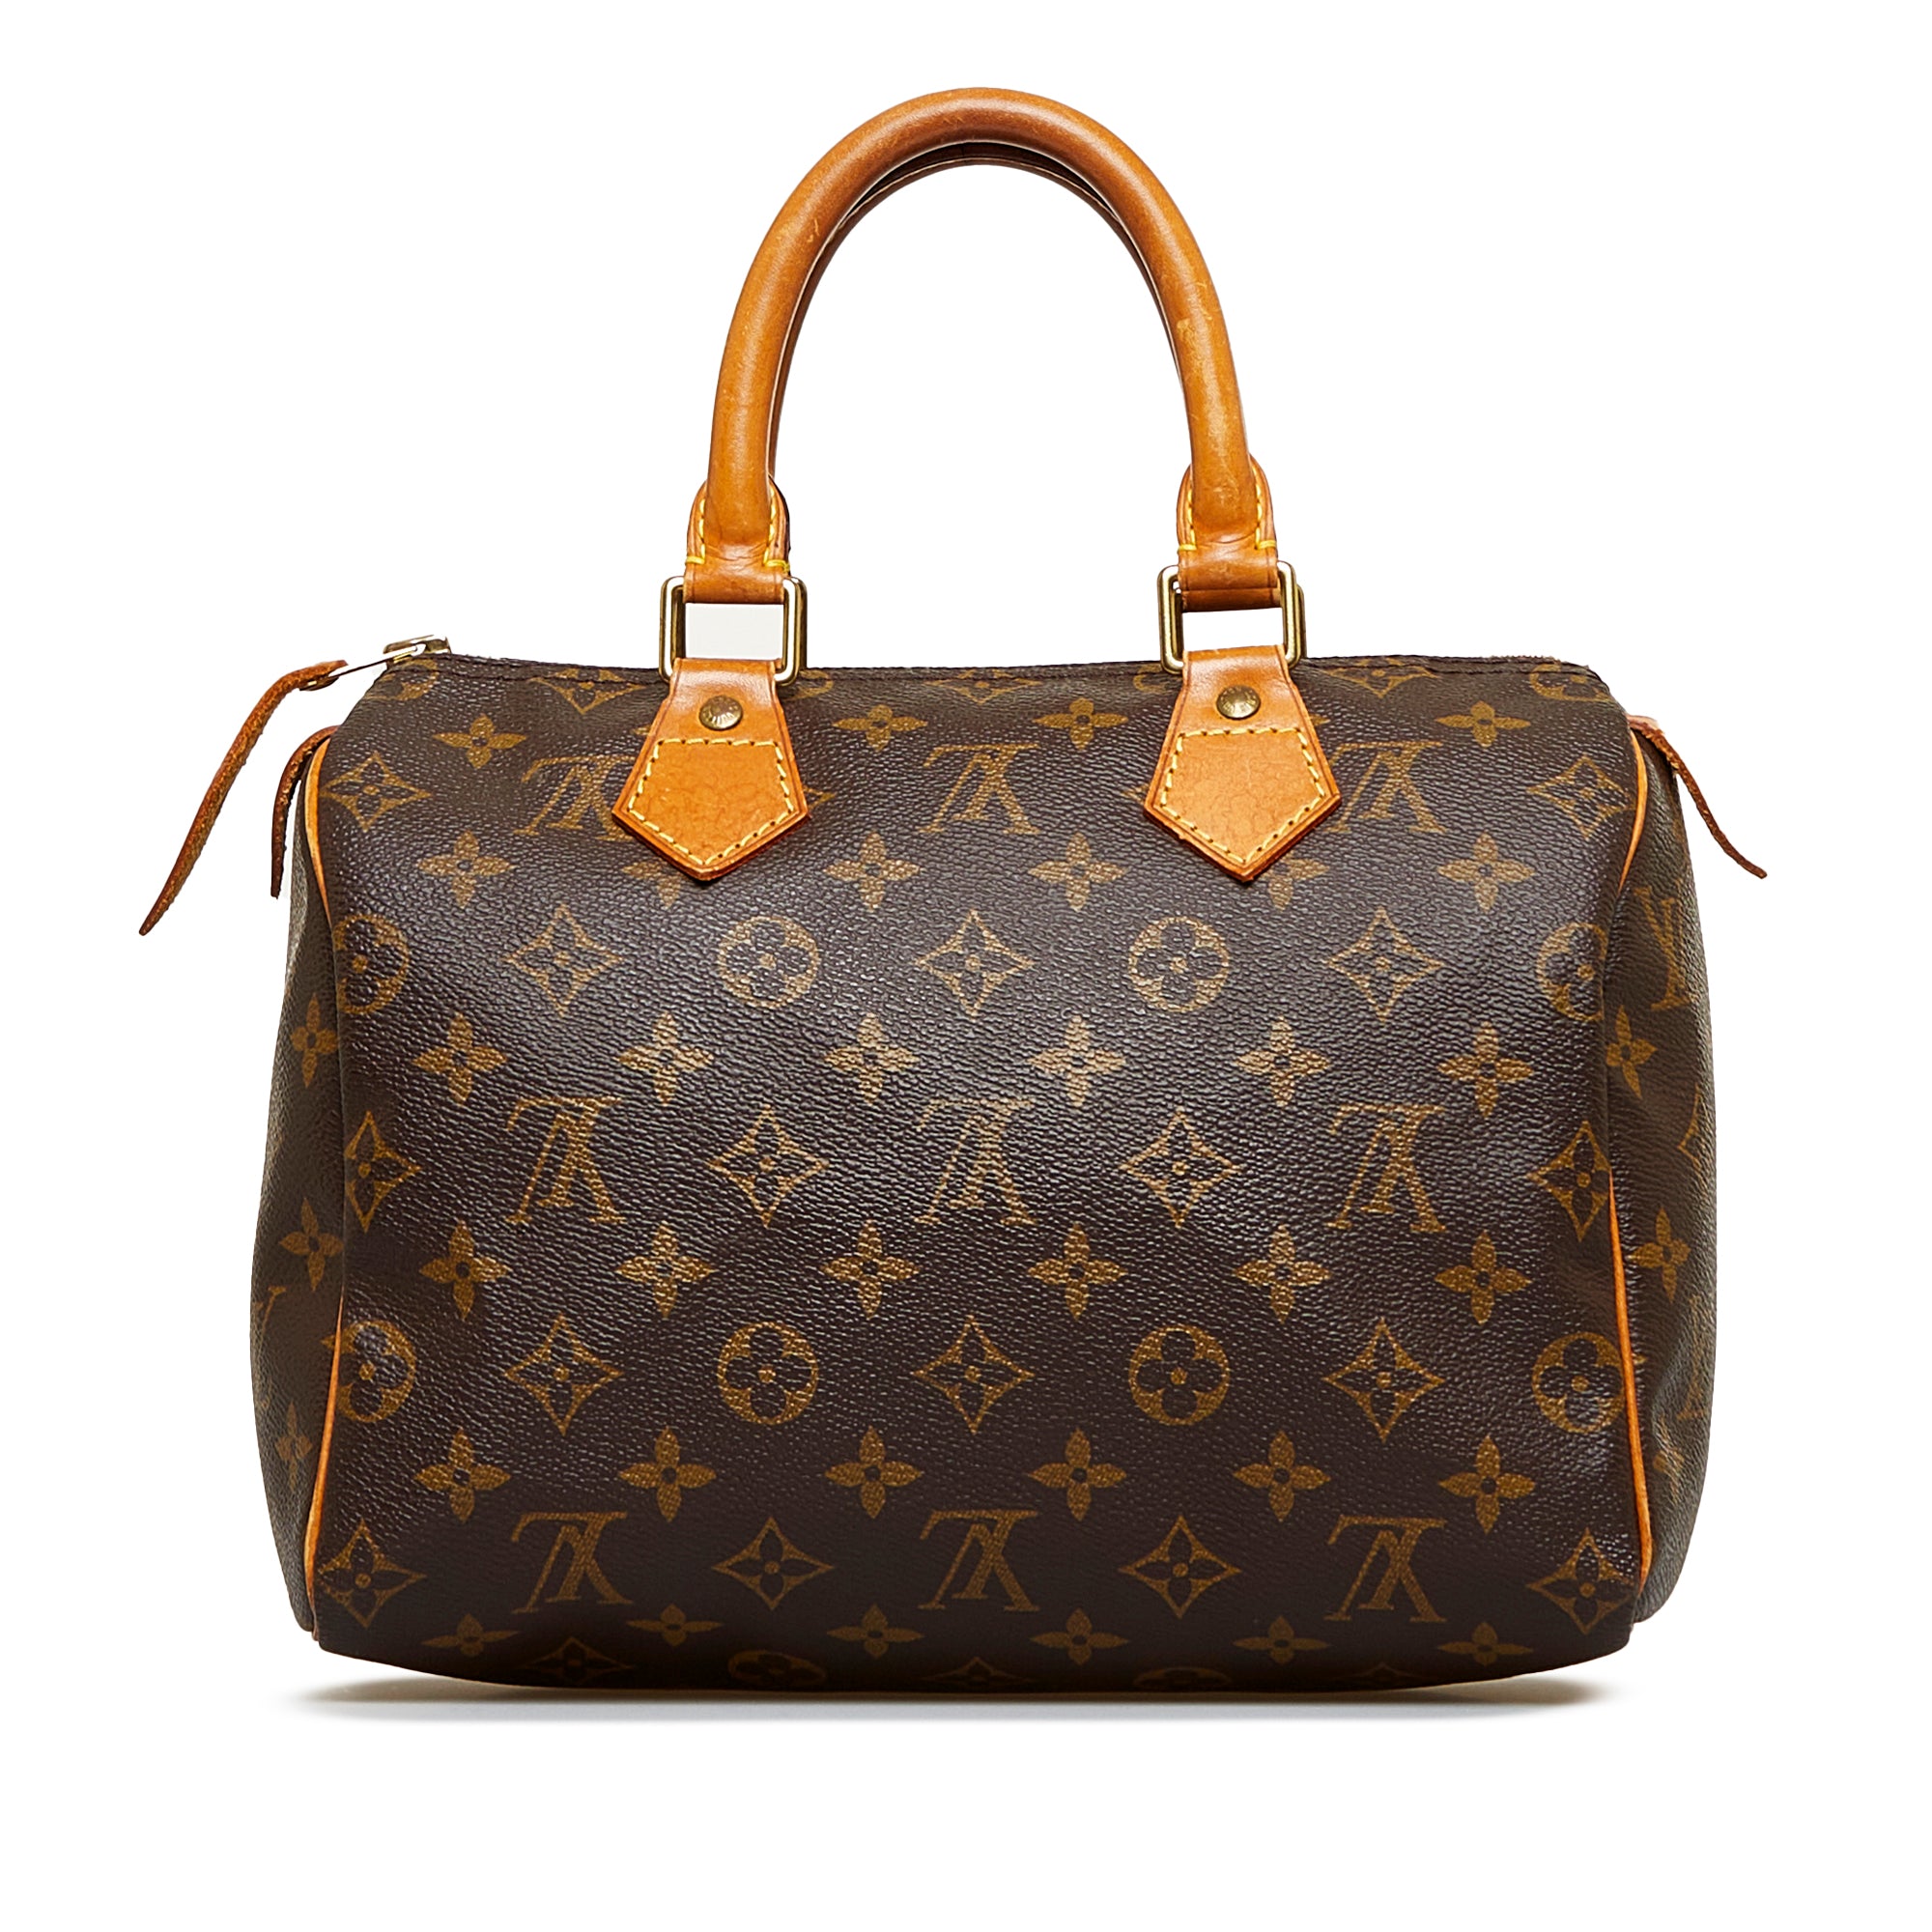 Authentic Louis Vuitton Speedy 25 Bag in Great Shape - clothing